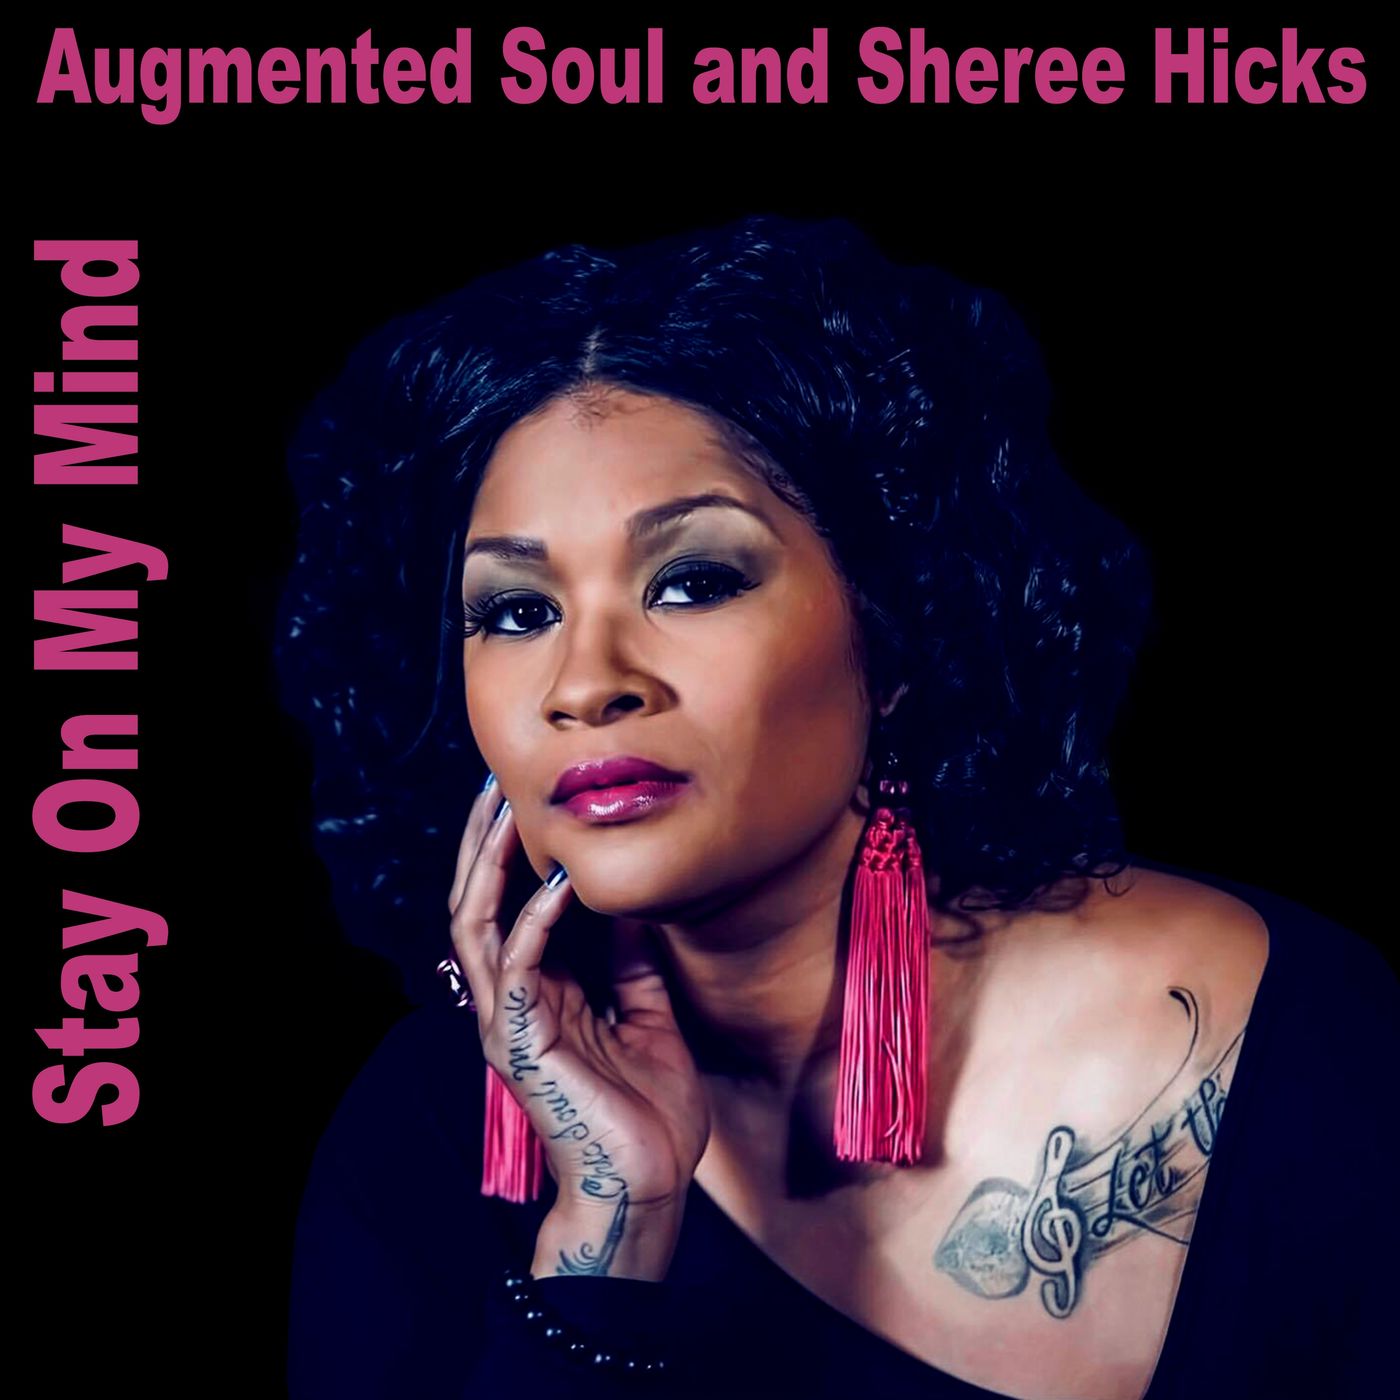 Augmented Soul & Sheree Hicks - Stay on My Mind / Augmented Soul (Pty) Ltd